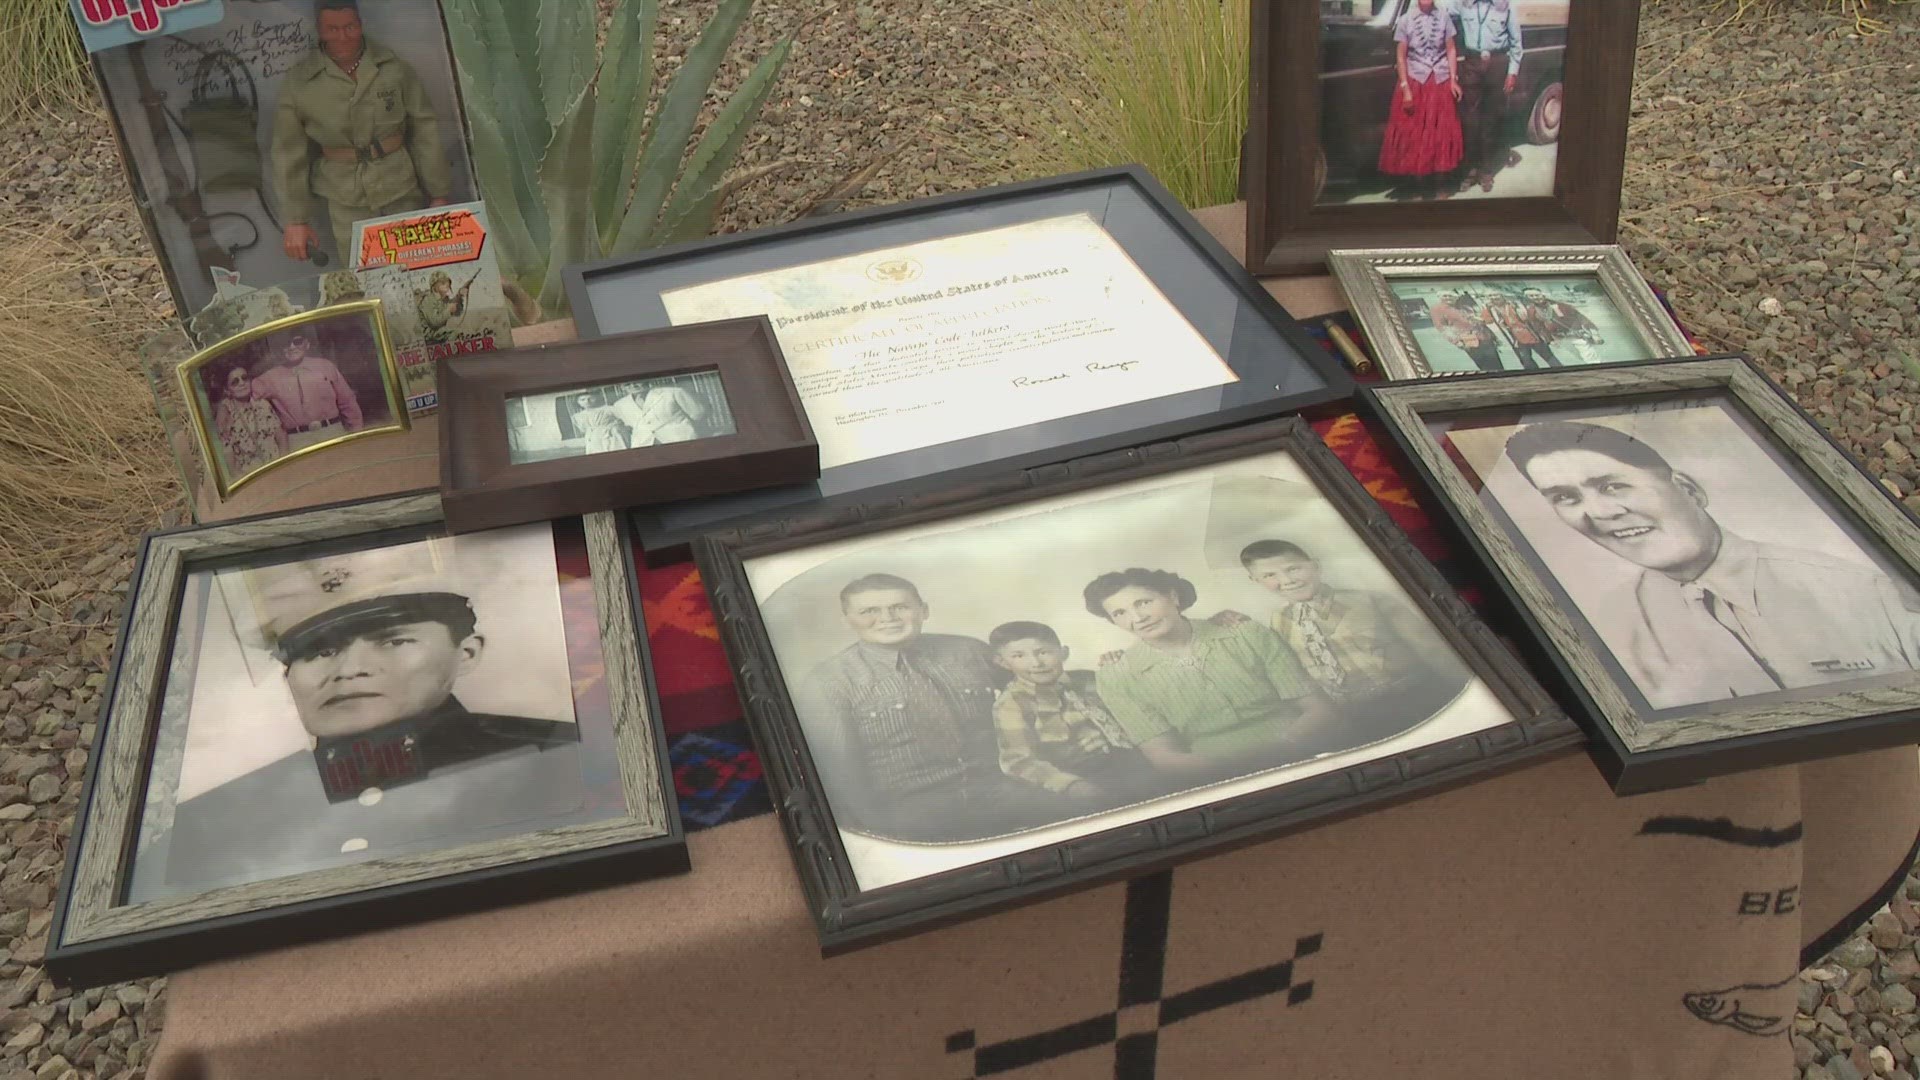 More than 400 Code Talkers served with the Marines. Today, only 3 remain alive.